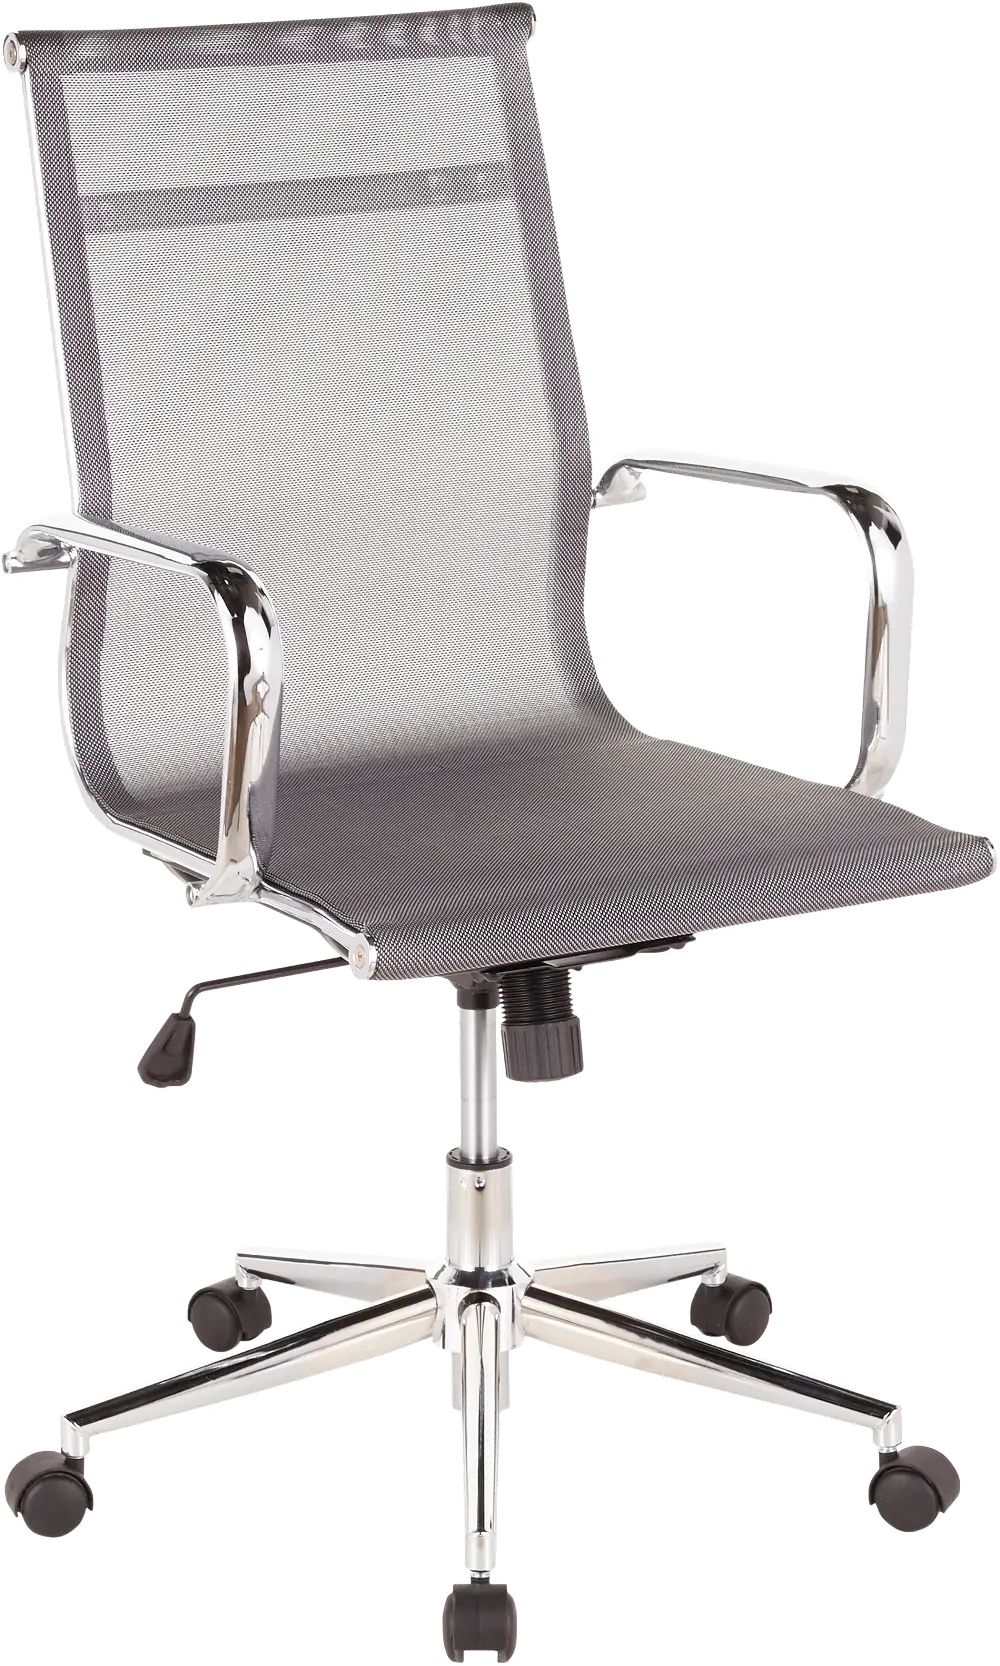 OFC-MIRAGE-SV Chrome and Gray Contemporary Office Chair - Mirage-1